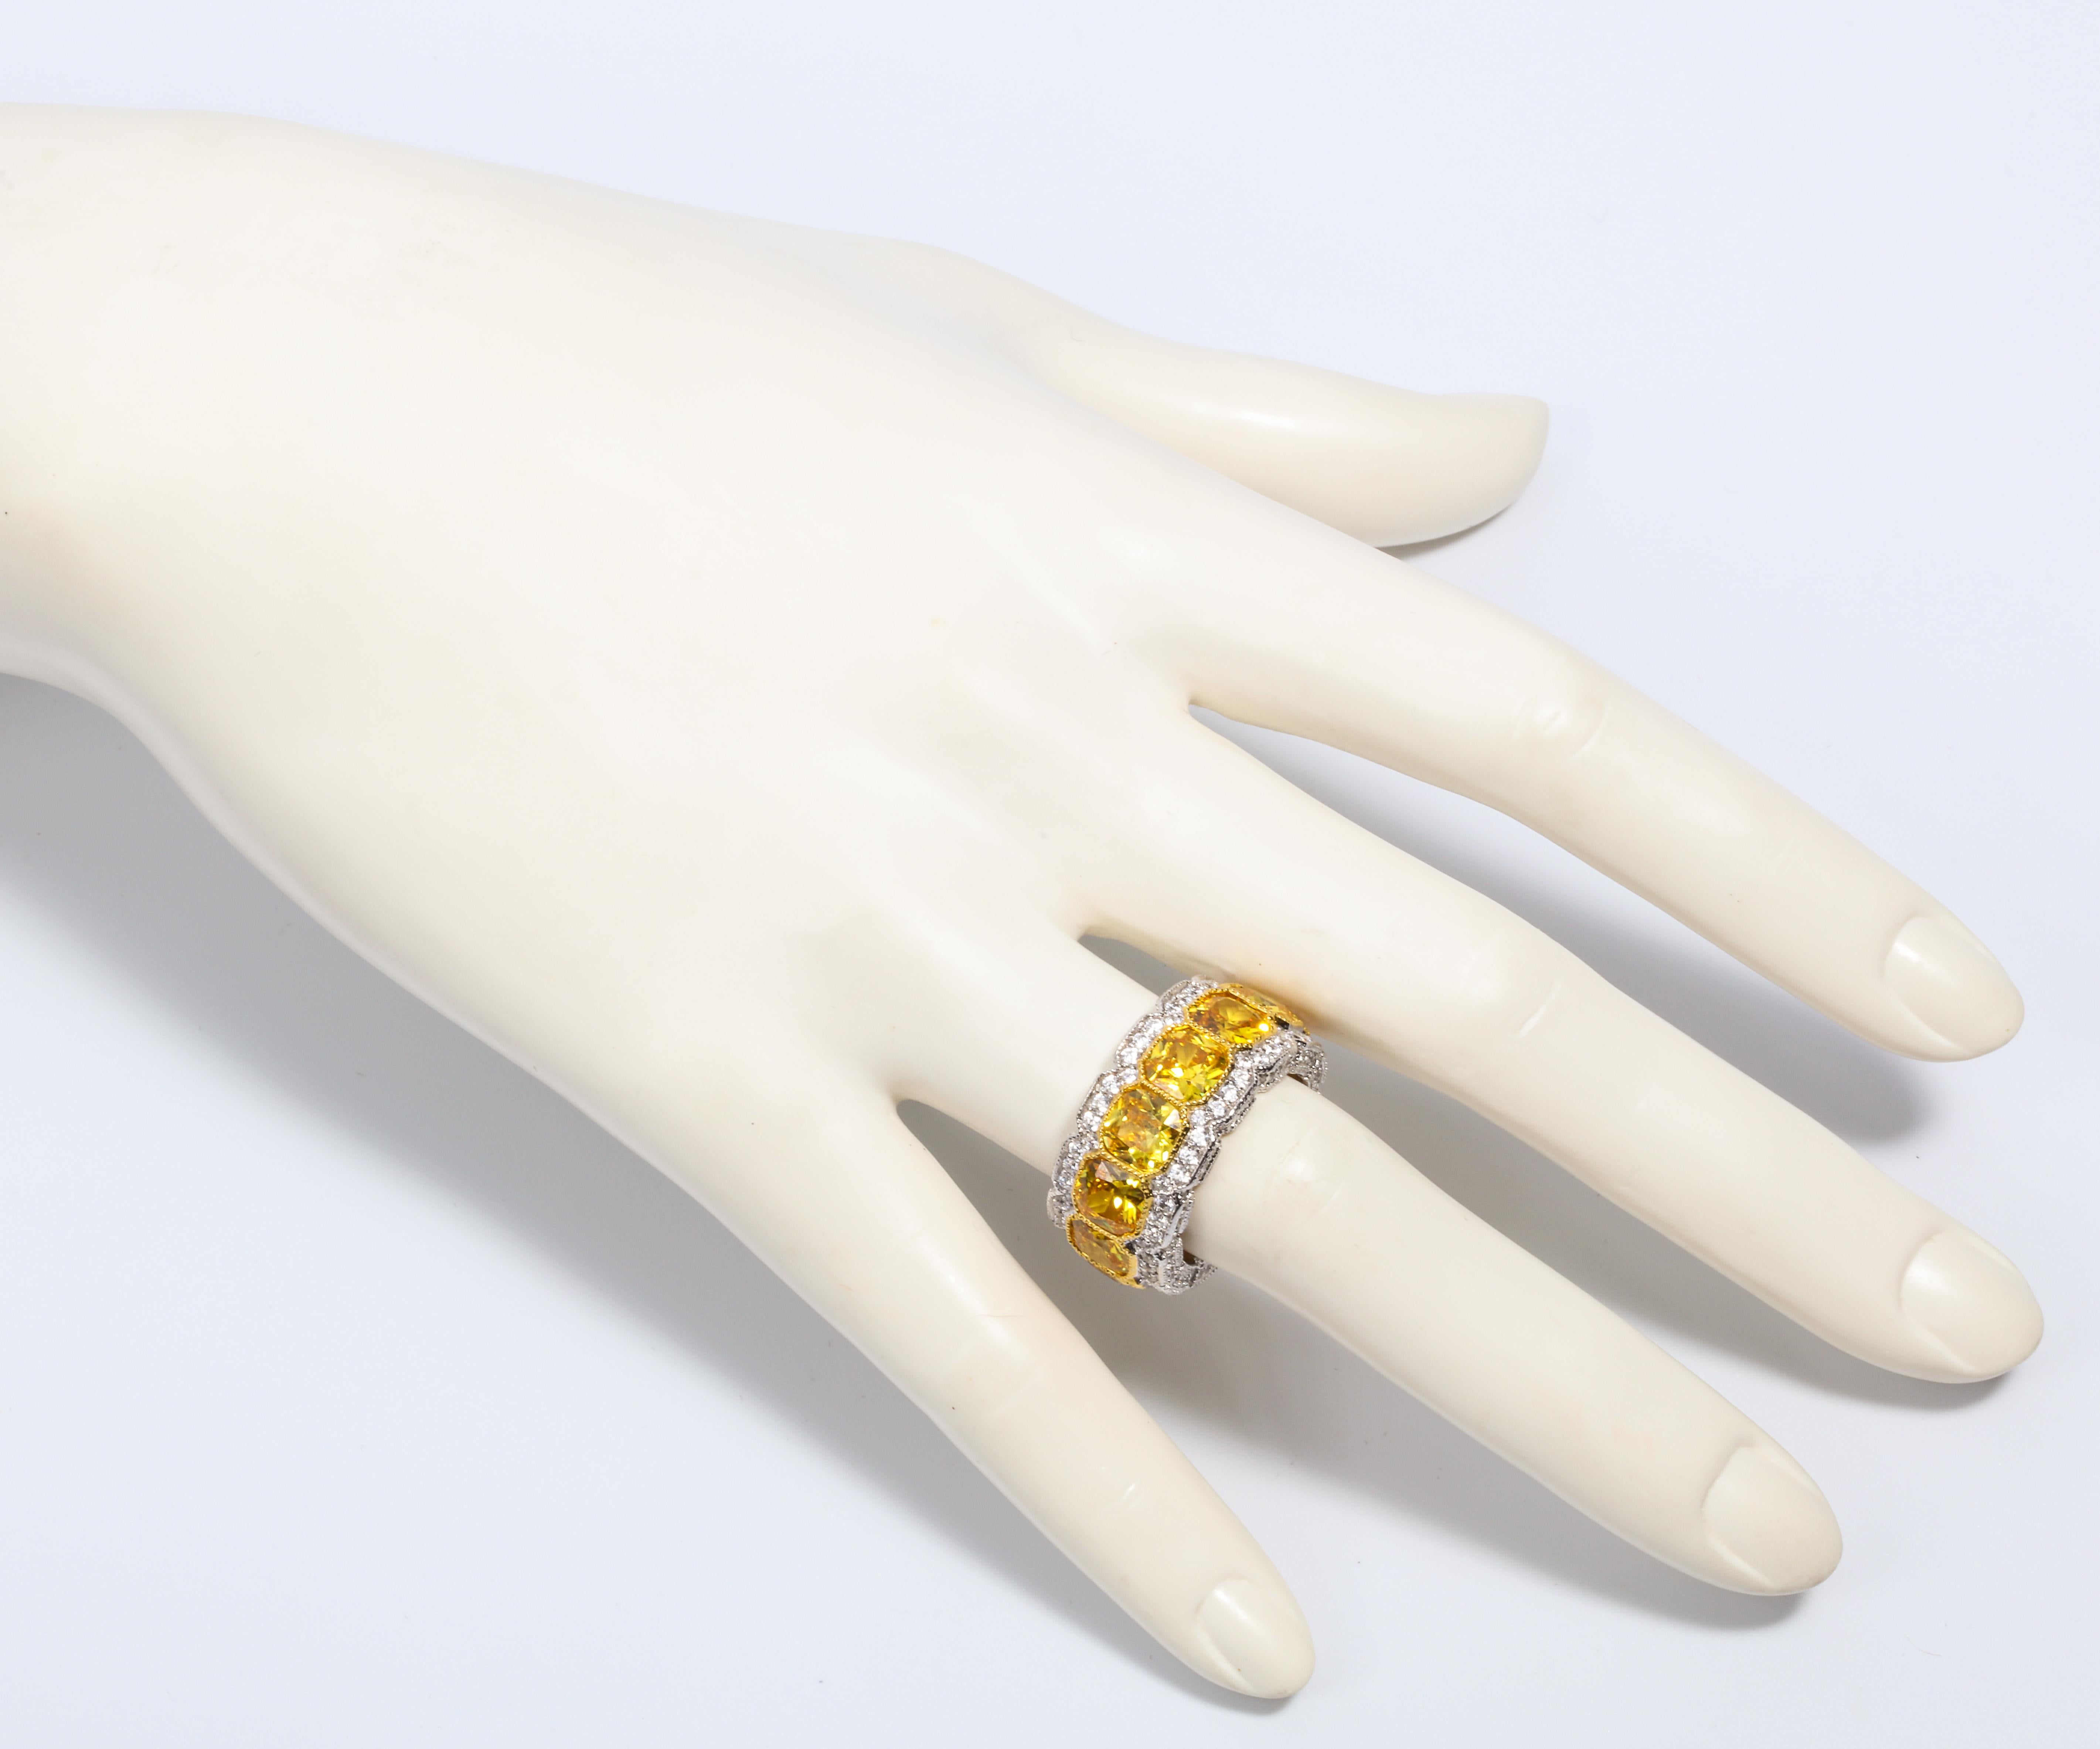 Magnificent Costume Jewelry stunning faux yellow diamond half inch wide band mille-grain set with stones on the side as well all completely pave.  Each colored stone is about one carat look. Size 7,